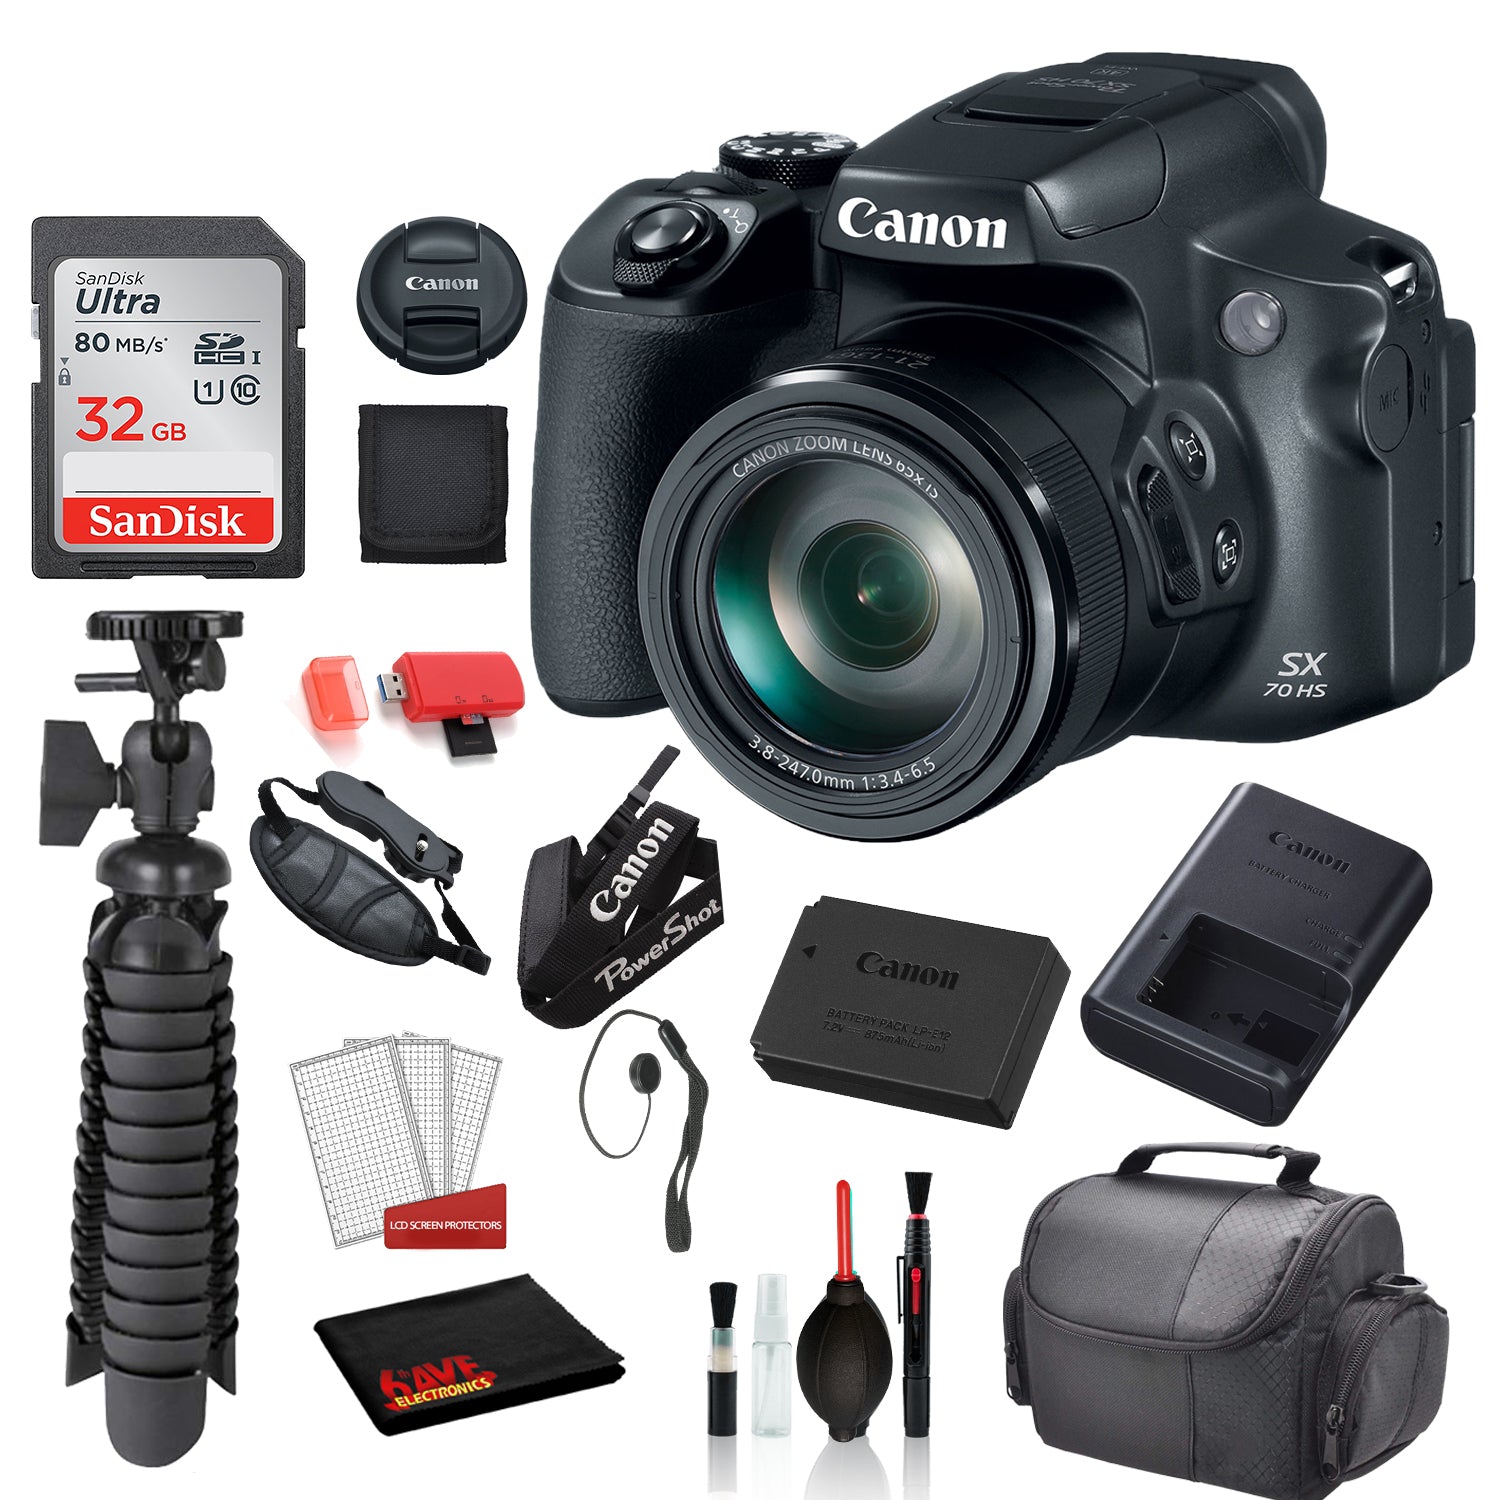 Canon PowerShot SX70 HS Digital Camera  with  SanDisk 32gb SD card + Deluxe Cleaning Kit + 12 Tripod + MORE(Intl Model)